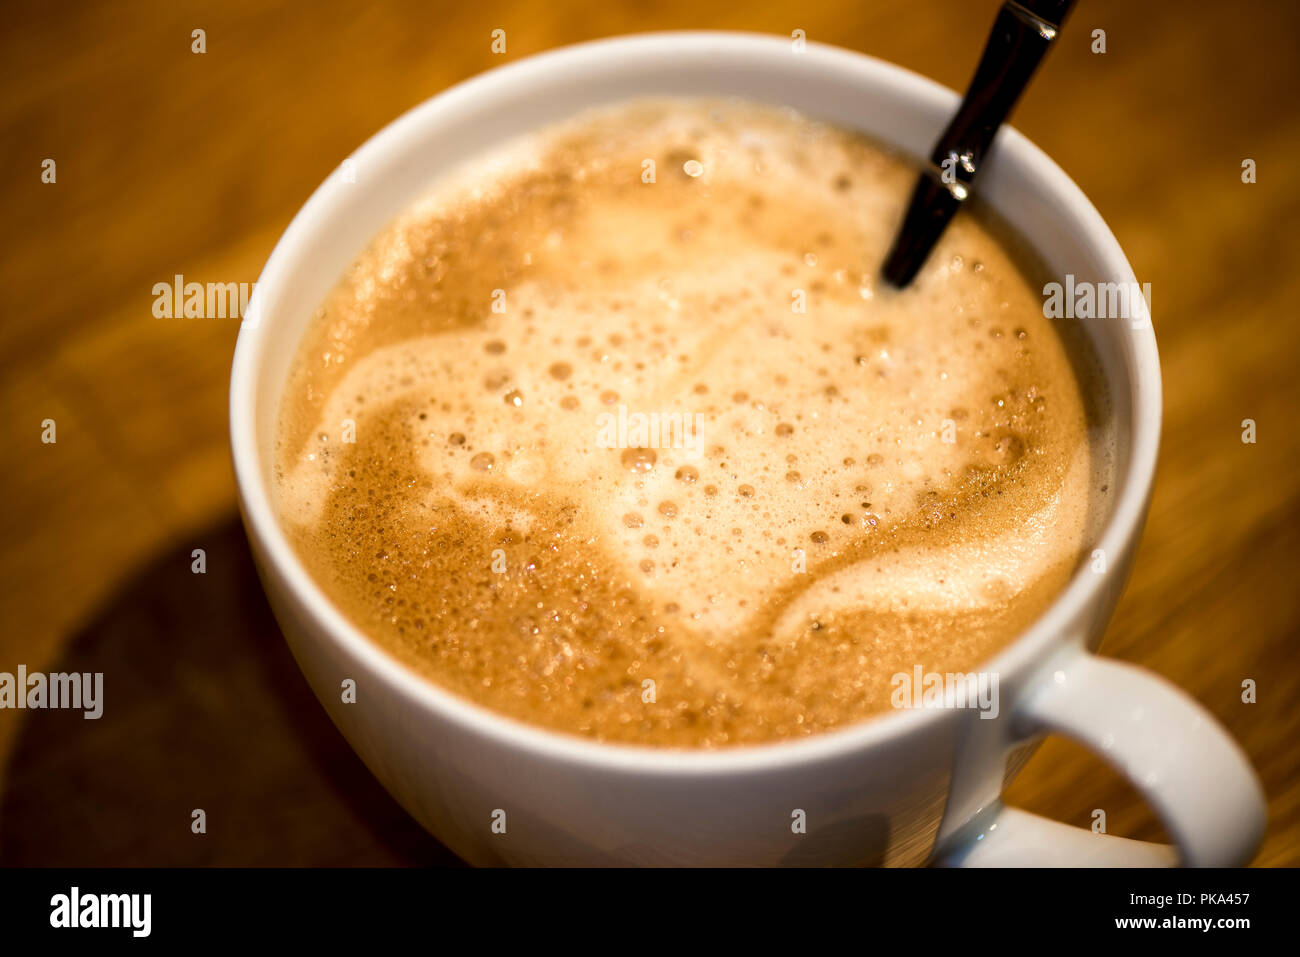 Bubbles form in the foam of a latte in a white cup. Stock Photo